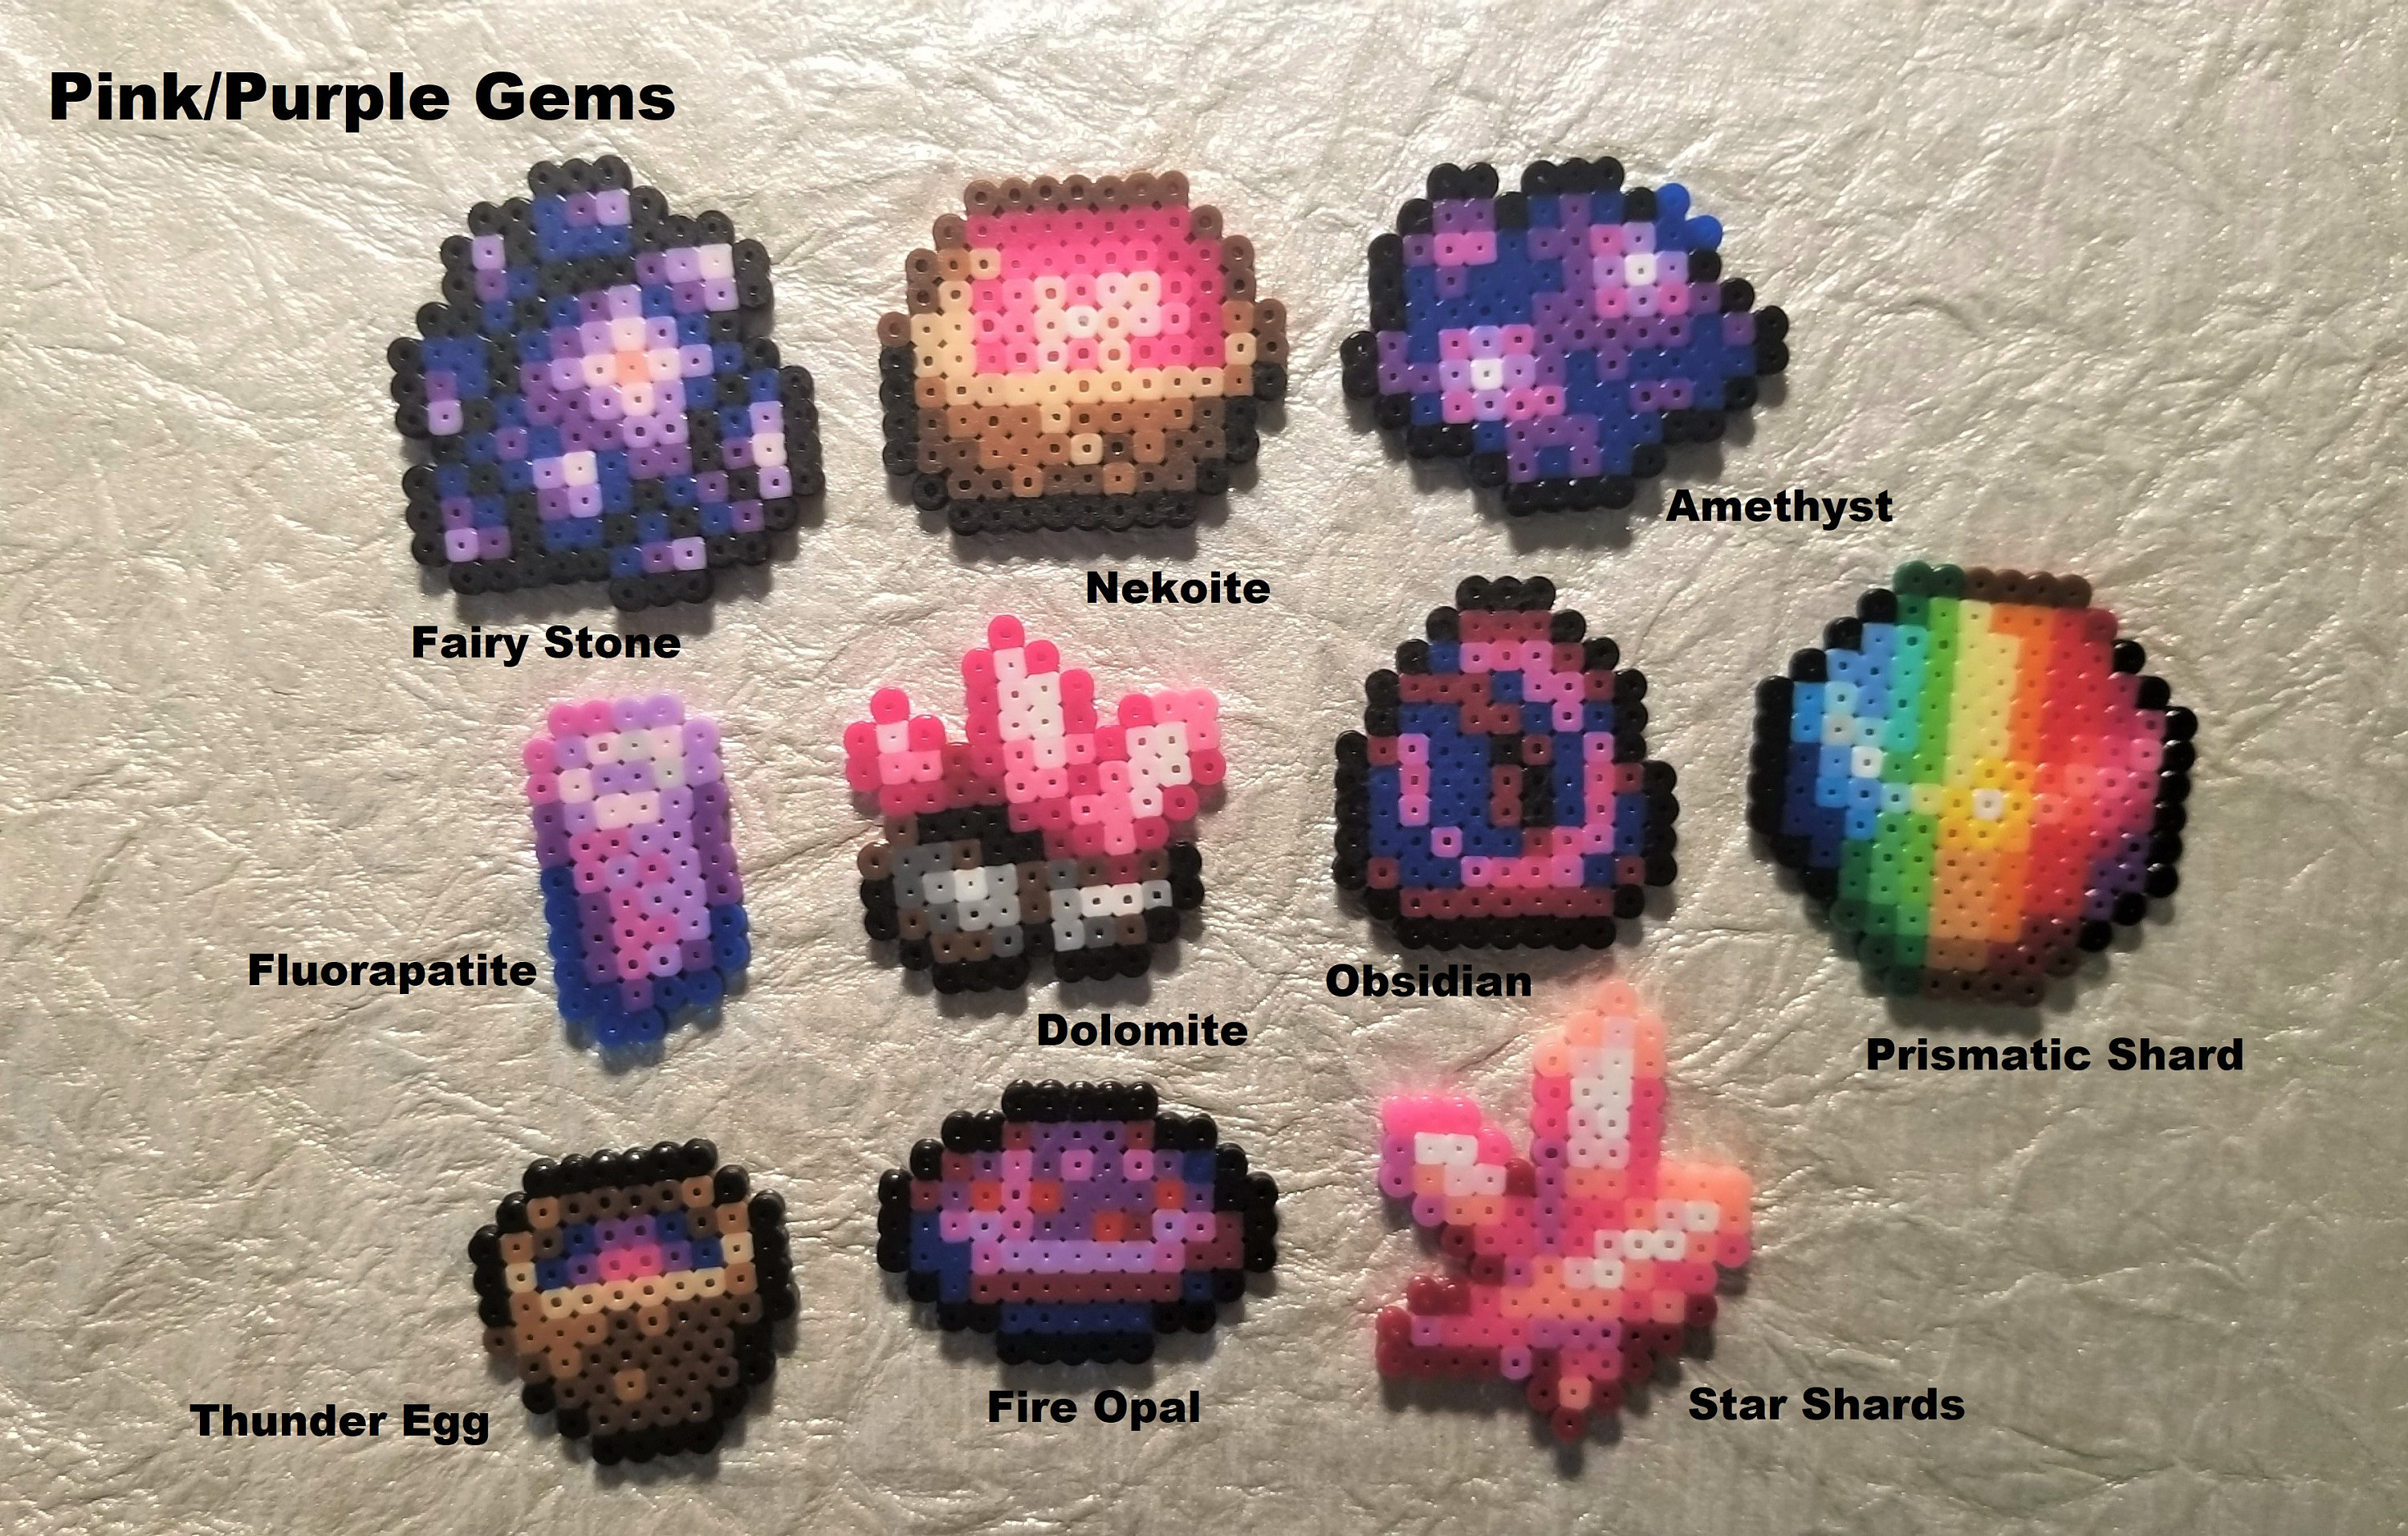 10 Gems And Minerals You Didn't Know You Needed In Stardew Valley